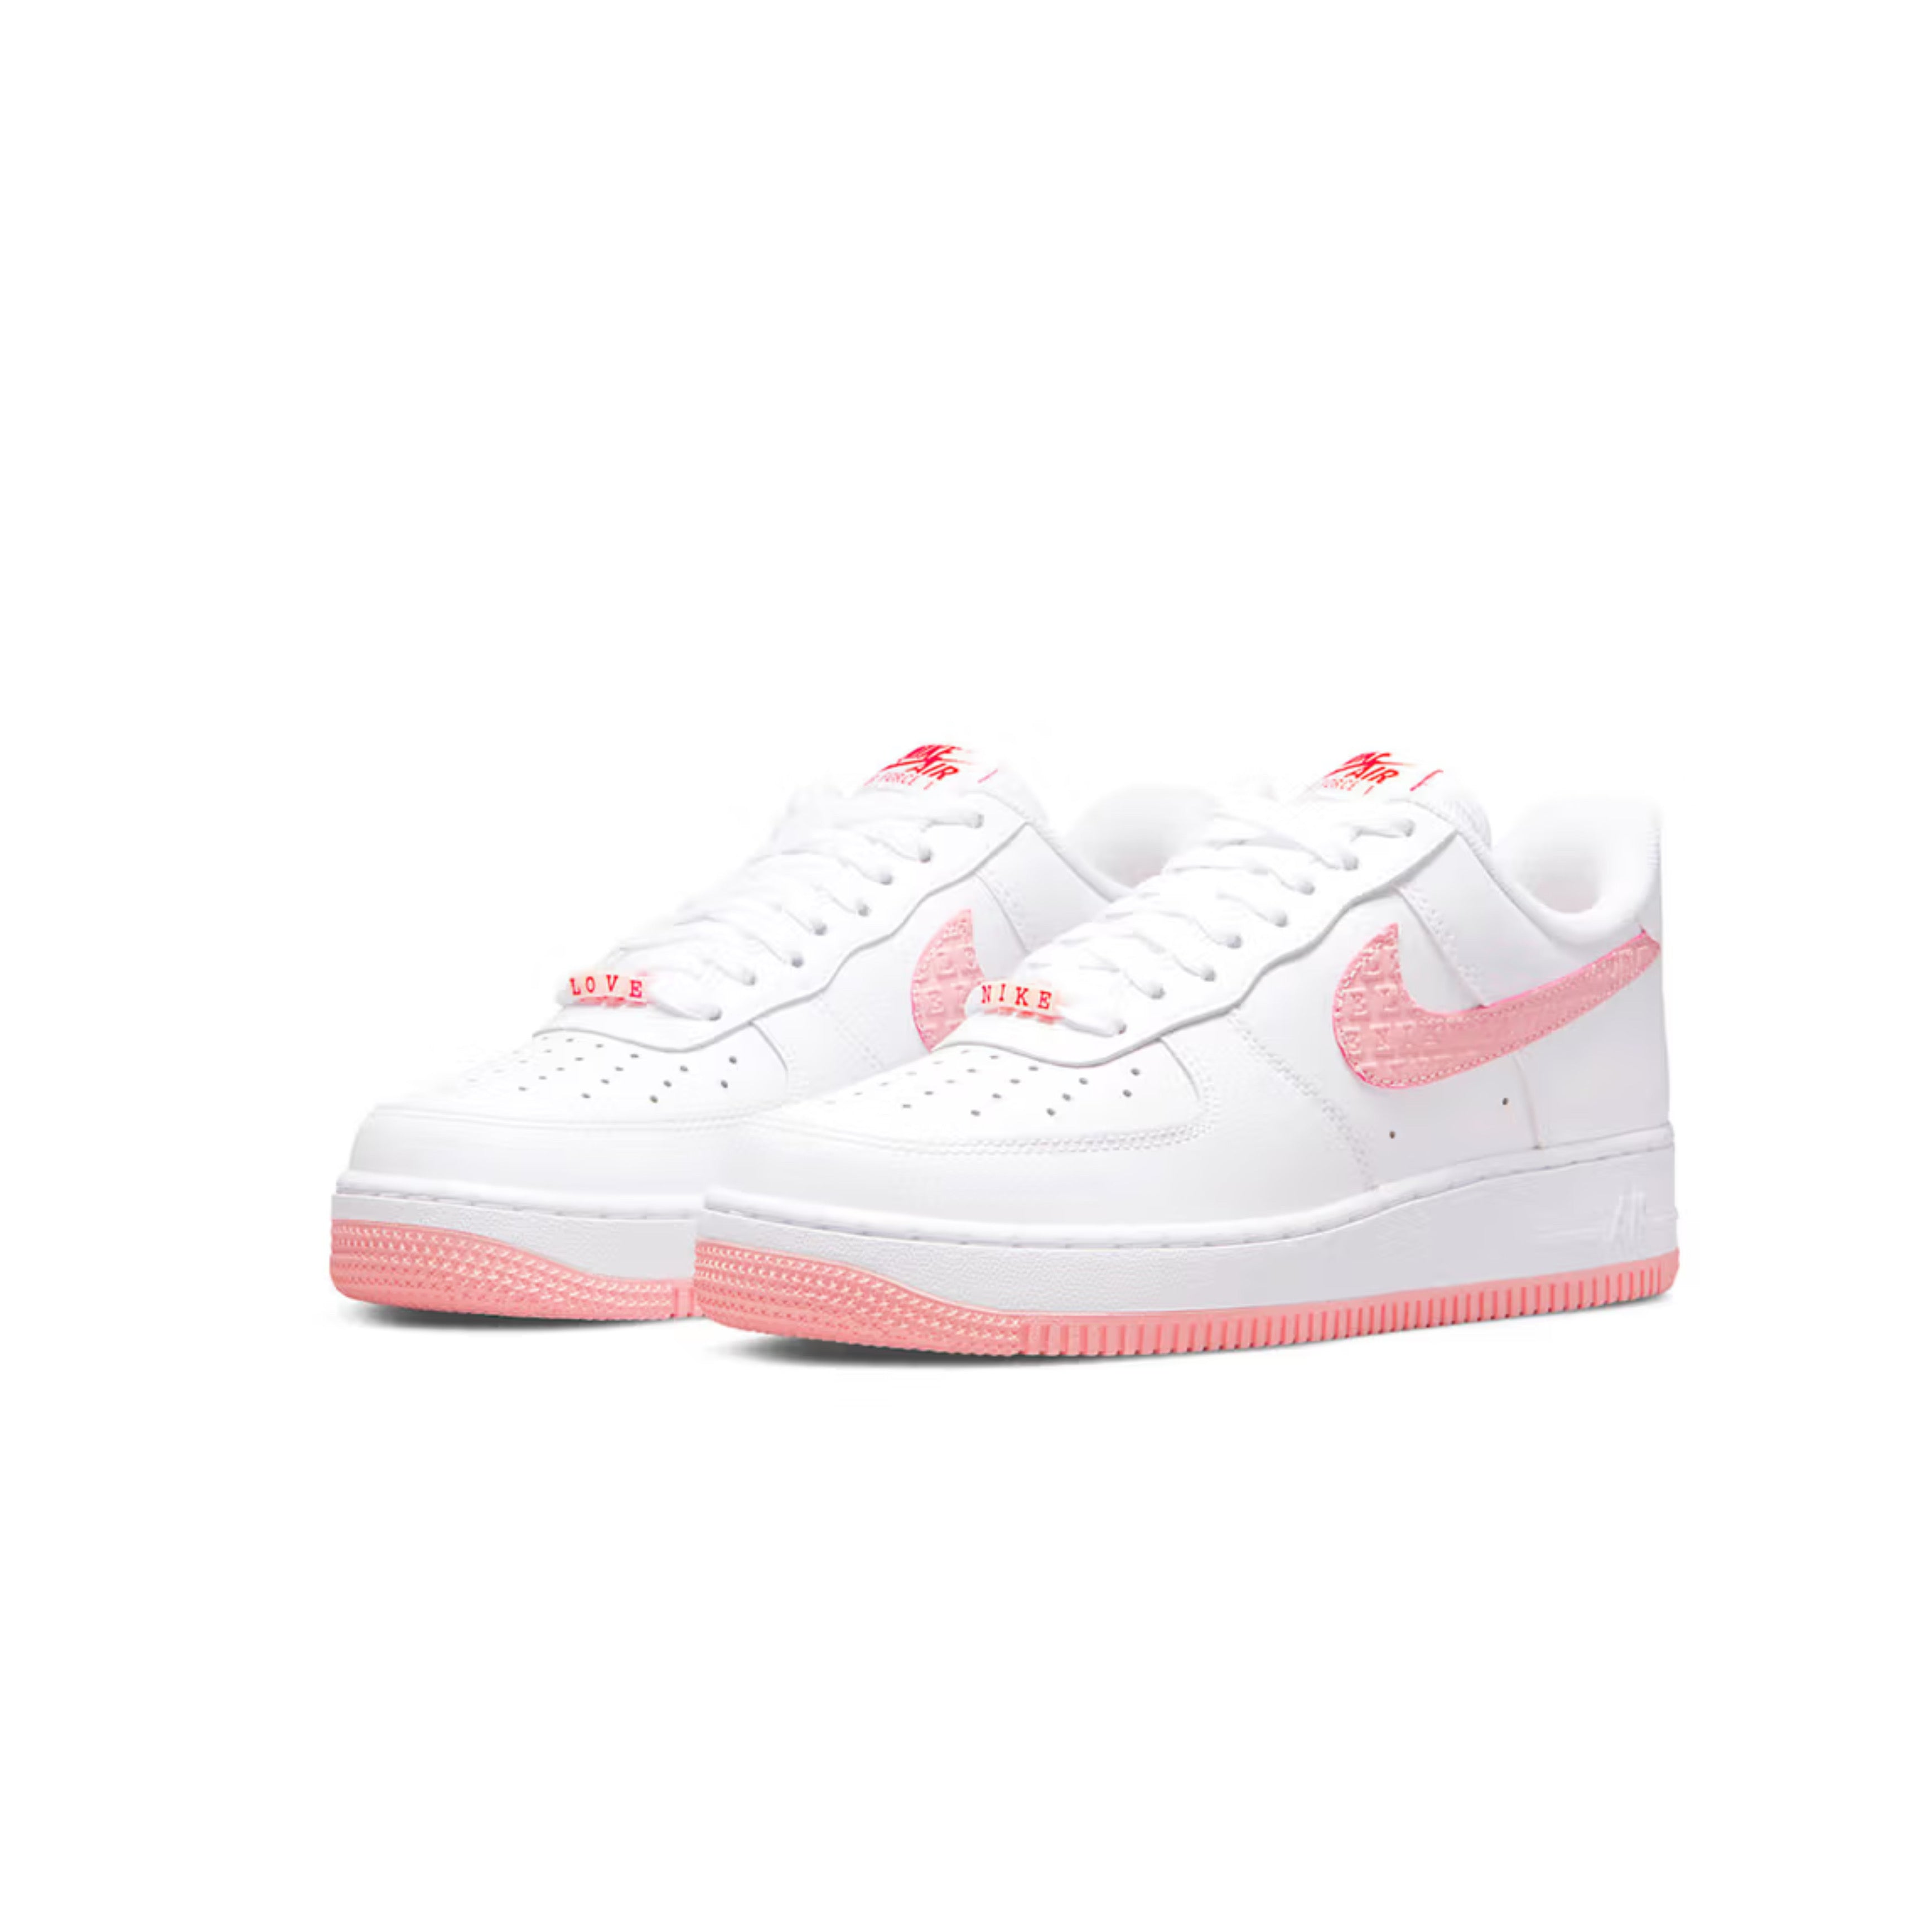 Nike airforce A1 valentines shoes